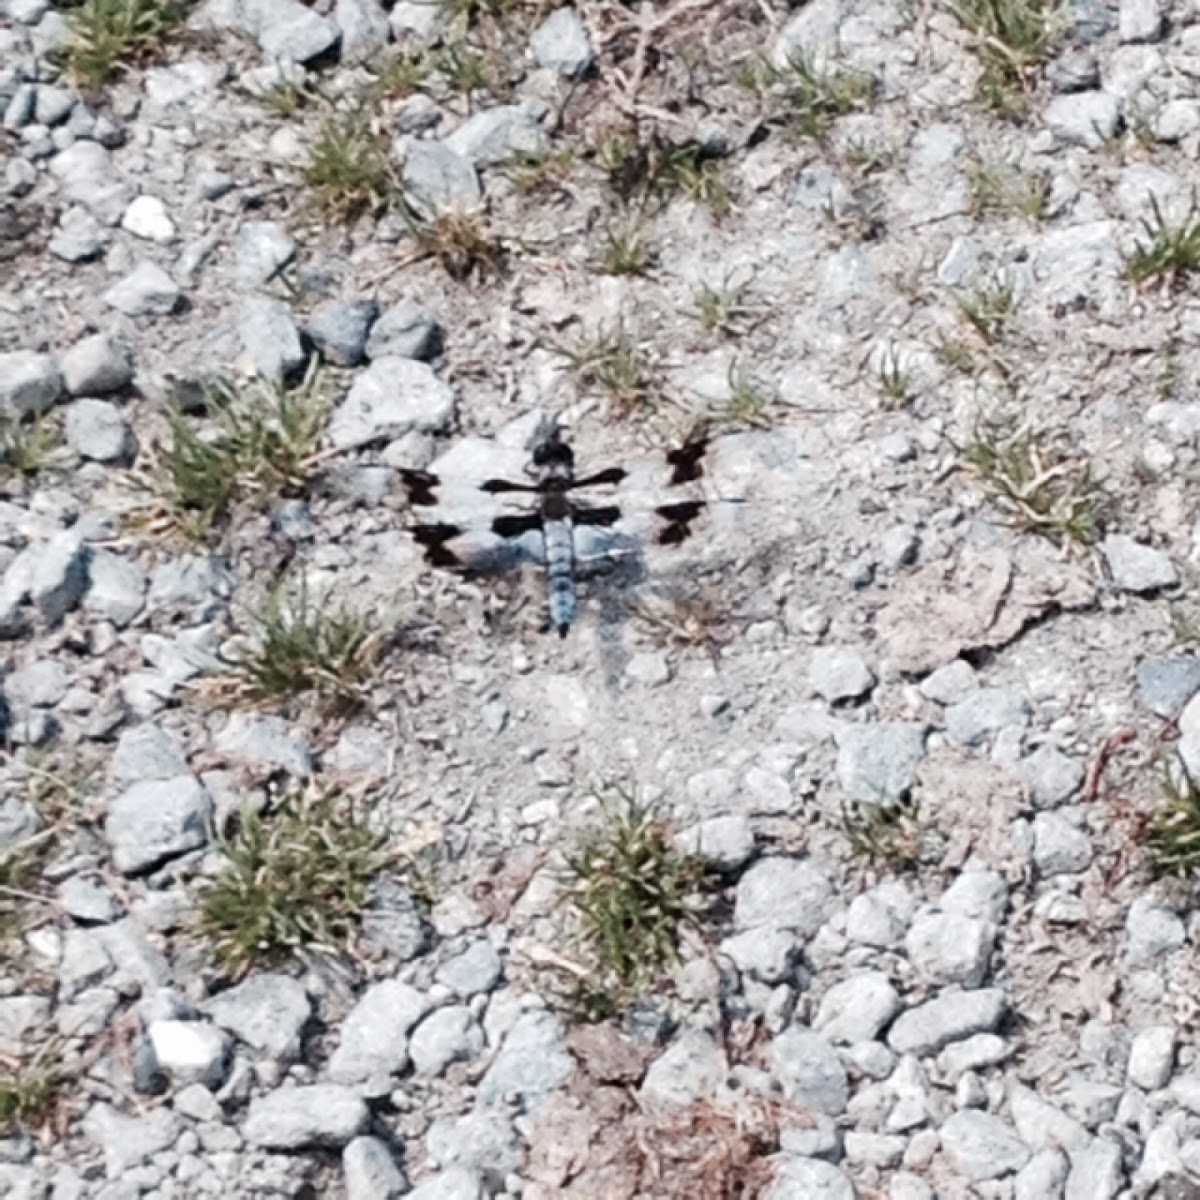 Eight-spotted Skimmer (male)